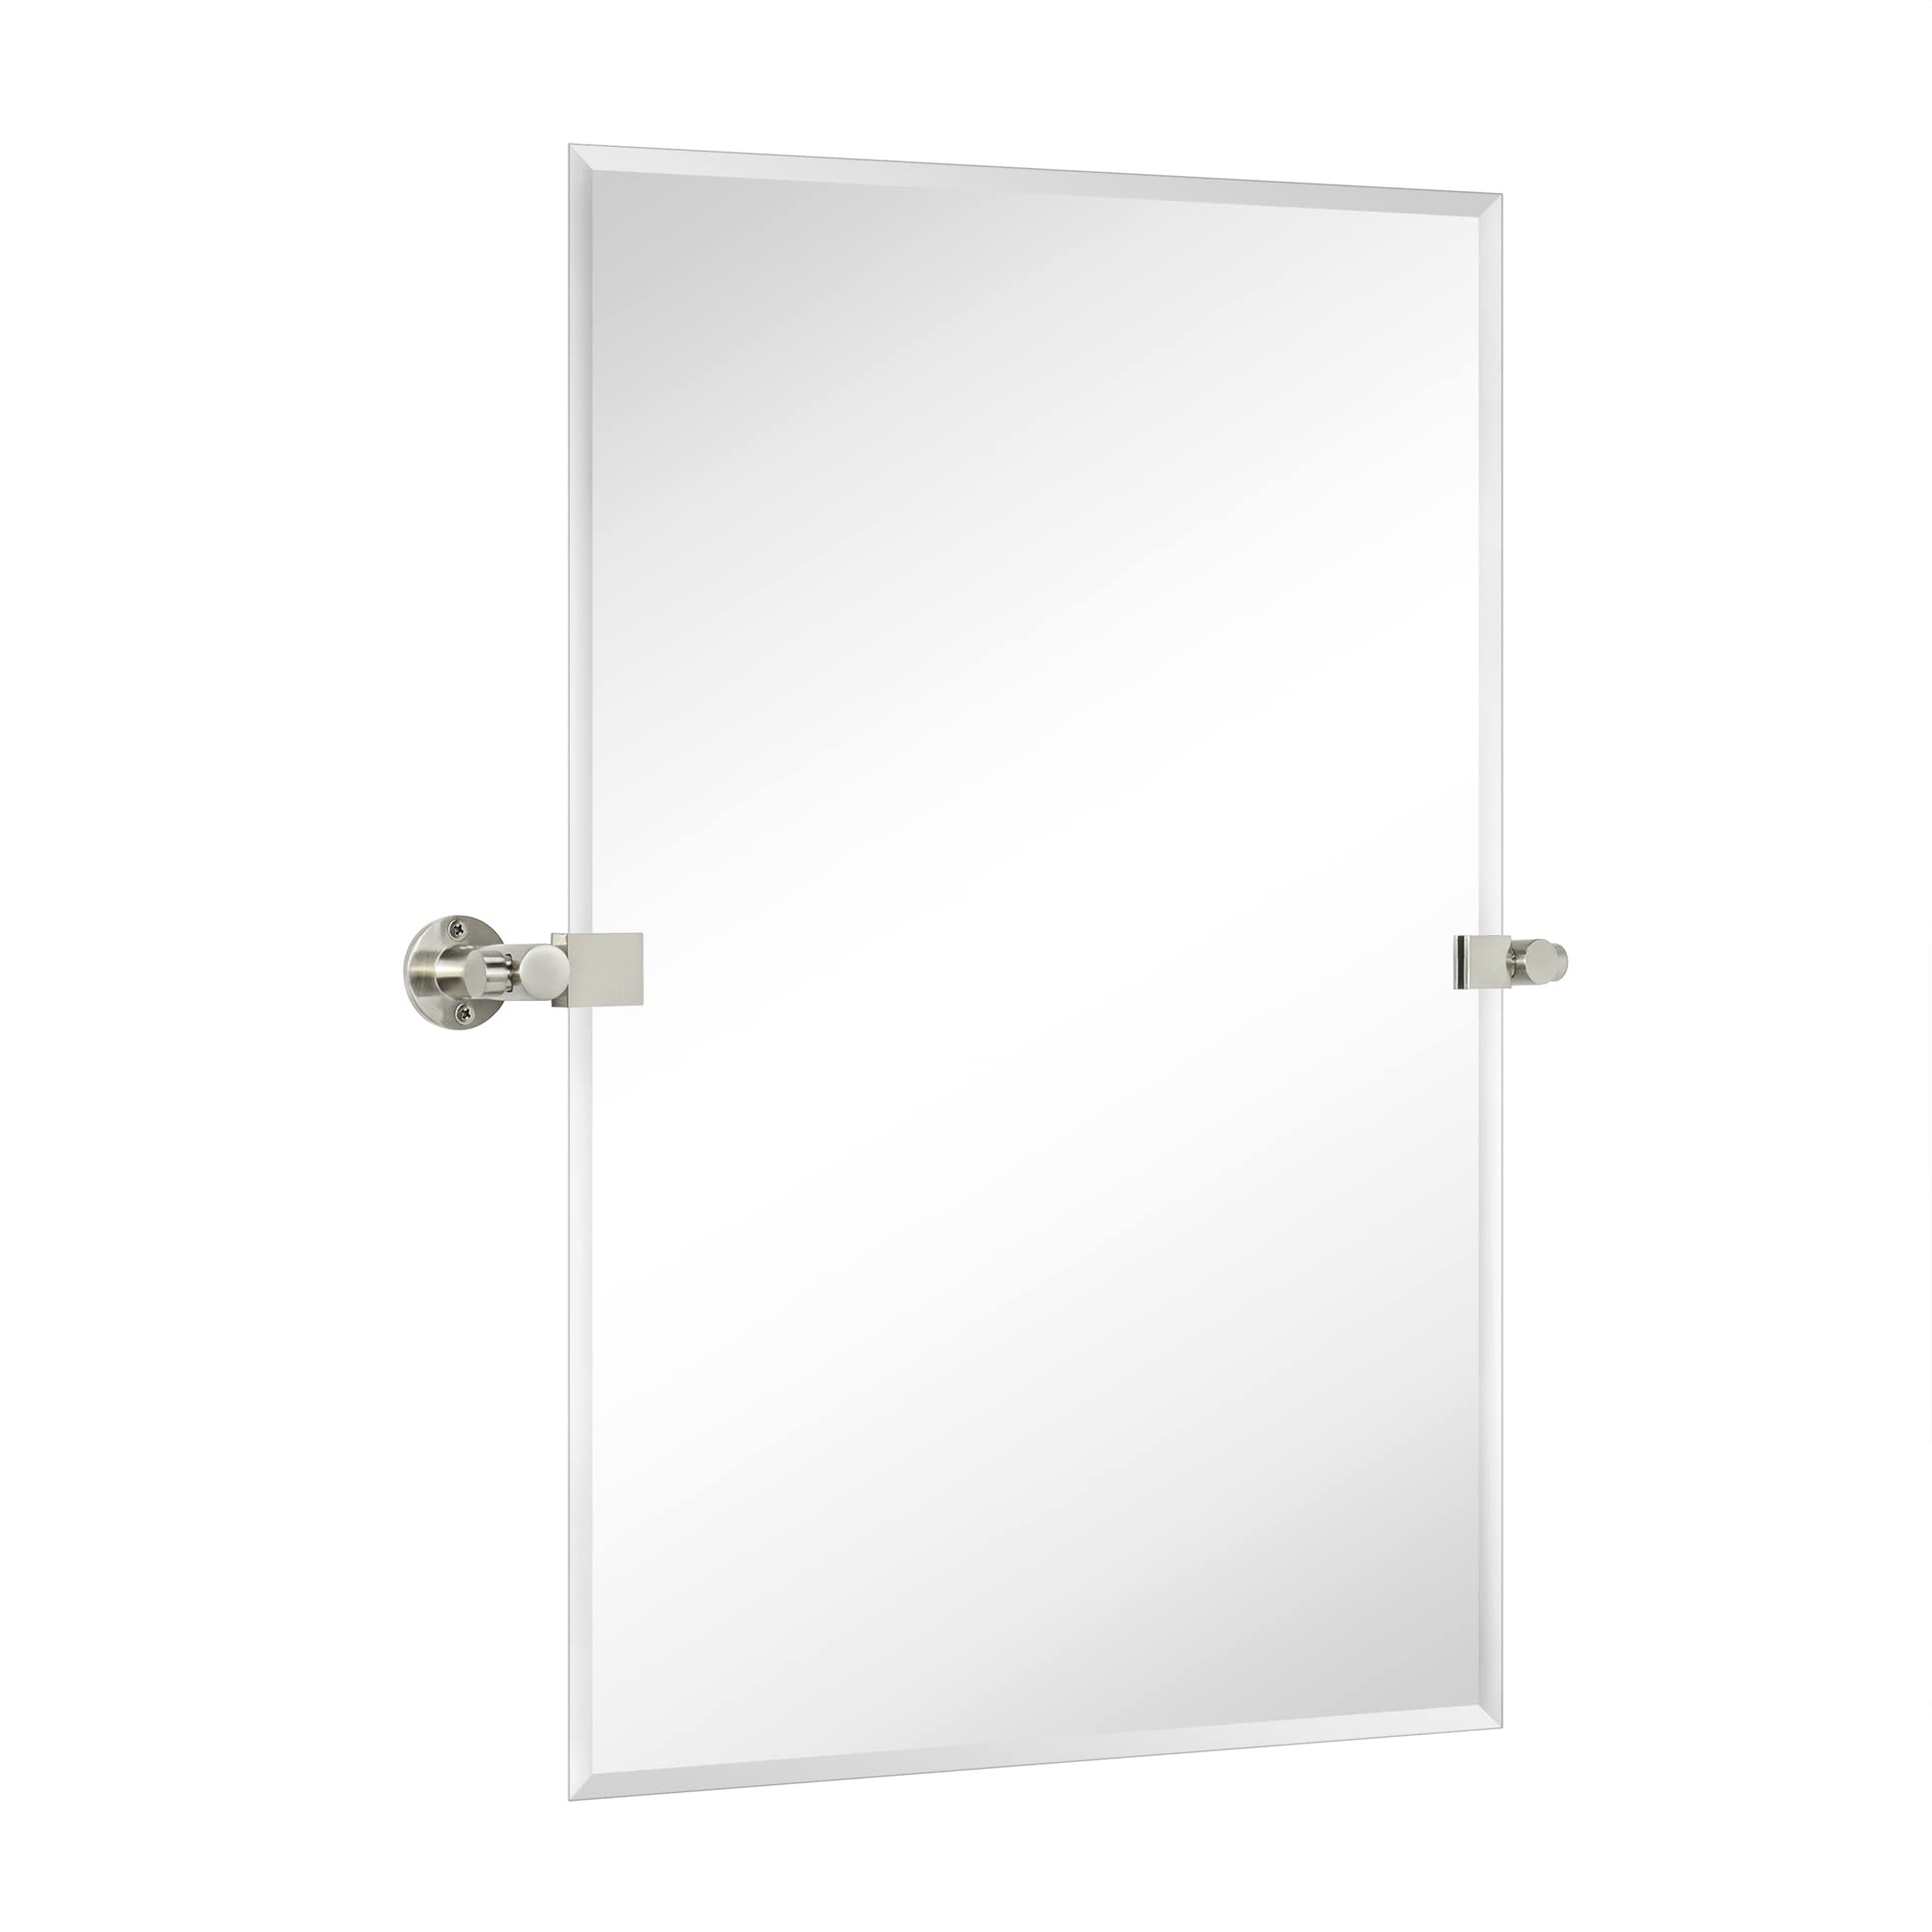 Nethery Rectangle Wall Mirror-20x30-Brushed Nickel